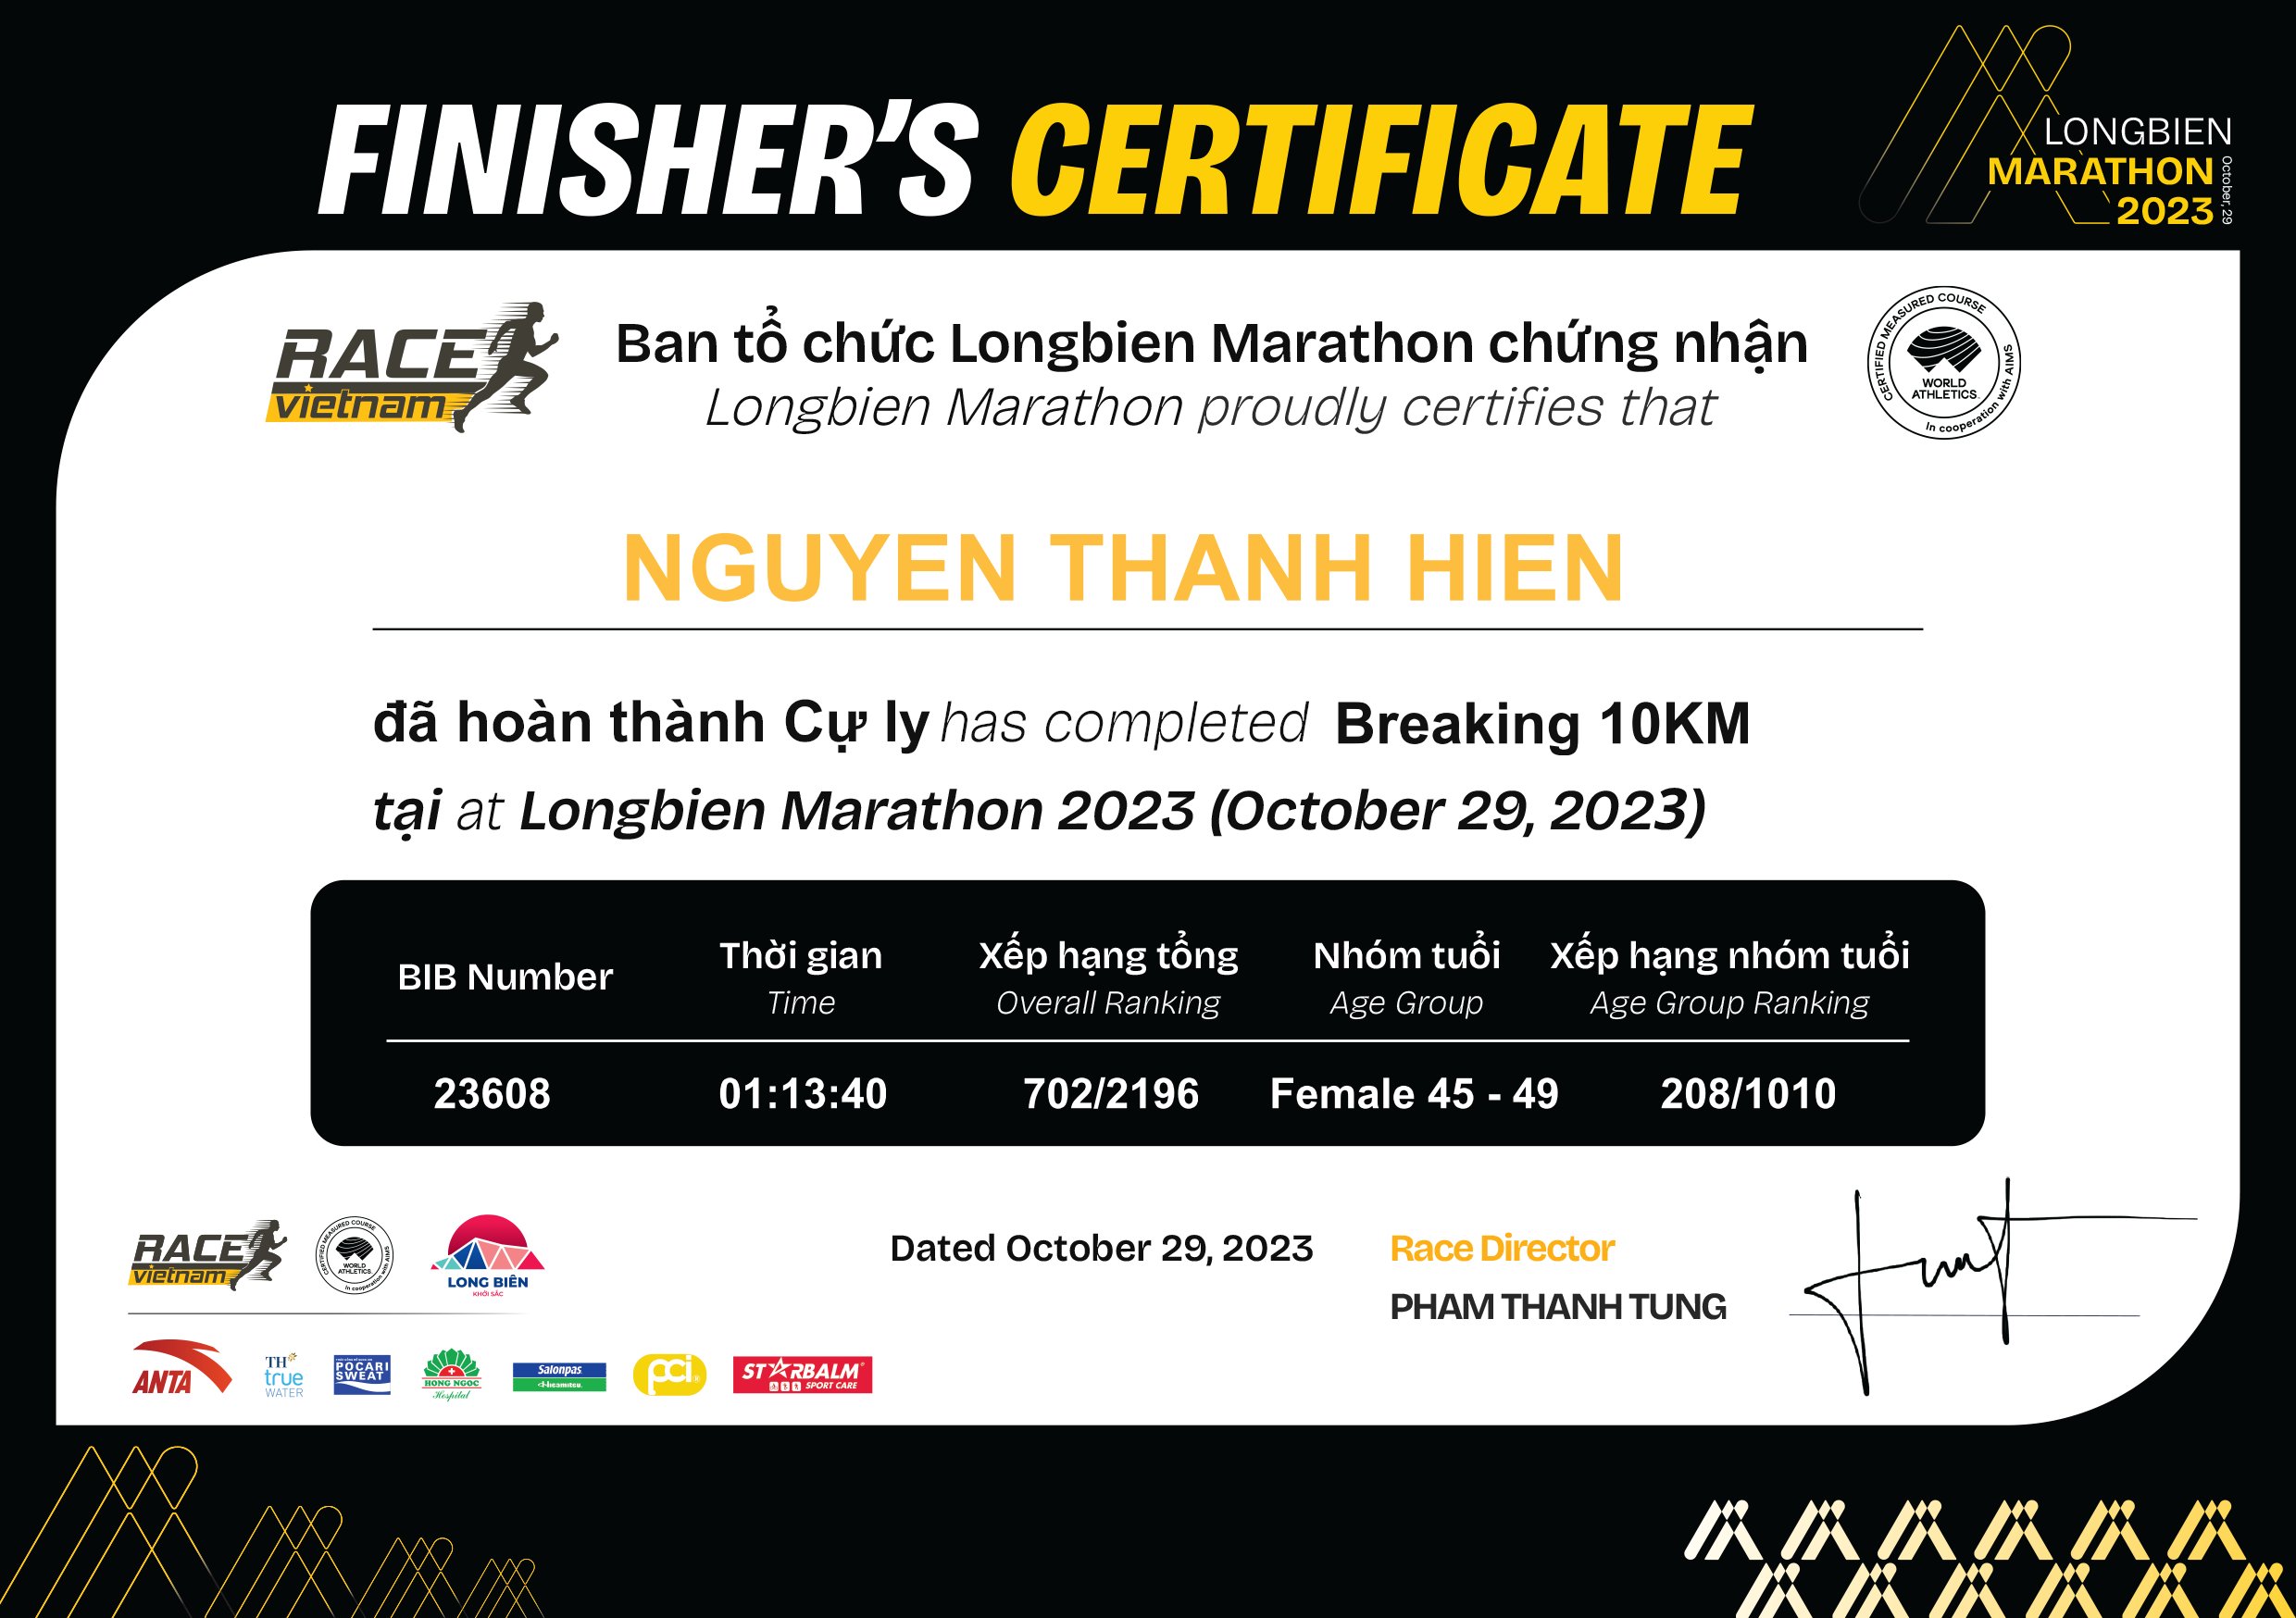 23608 - NGUYEN THANH HIEN